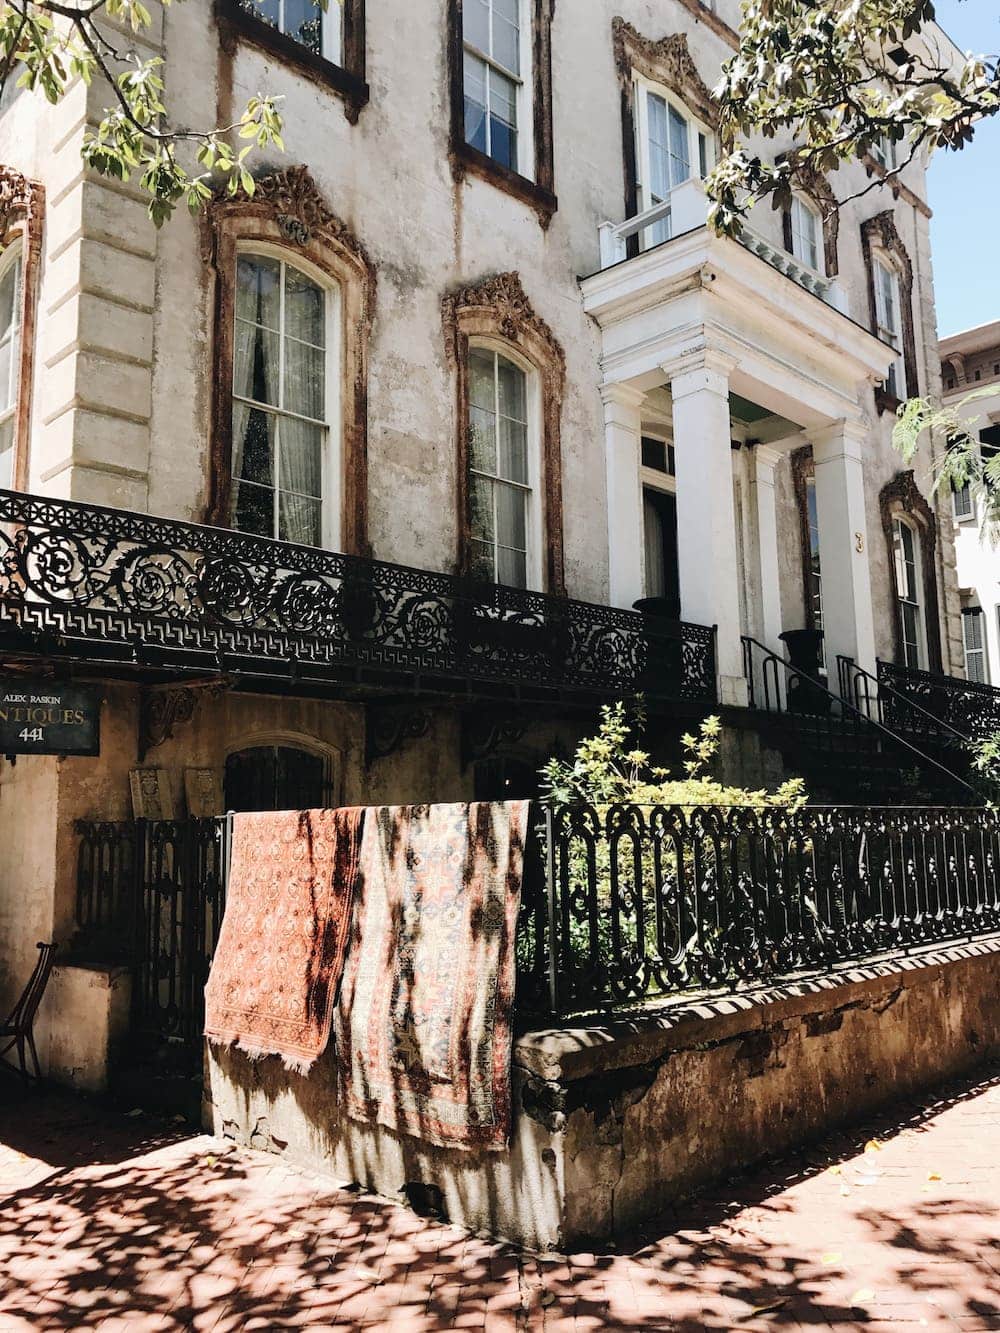 8 Reasons Why Savannah Is One of the Best Places to Travel in the U.S